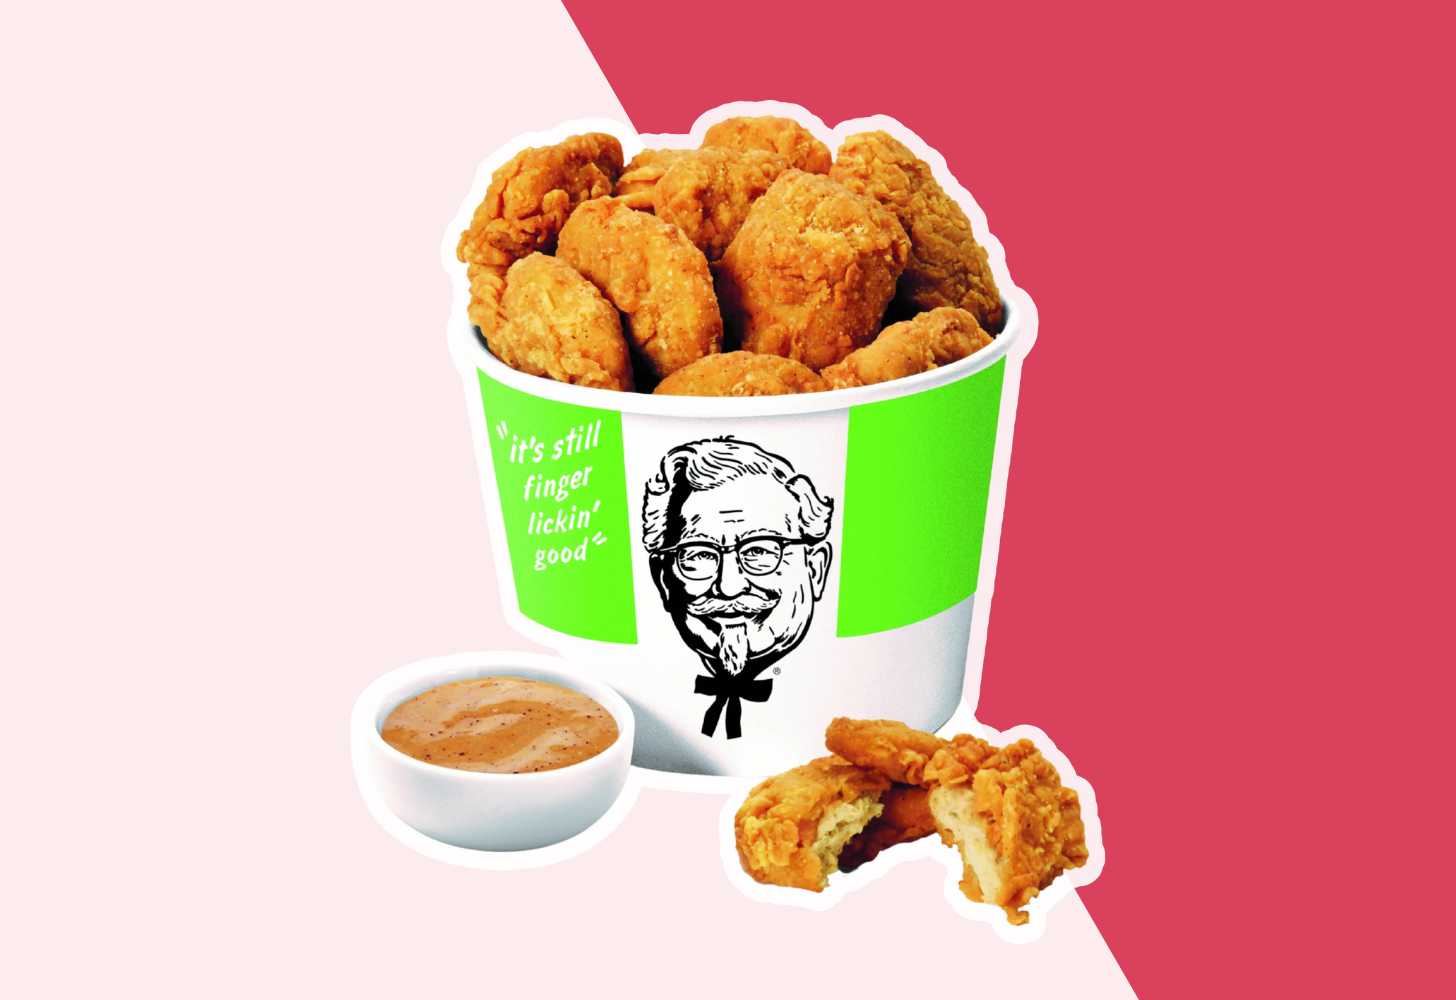 A bucket of KFC's Beyond Fried Chicken with sauce